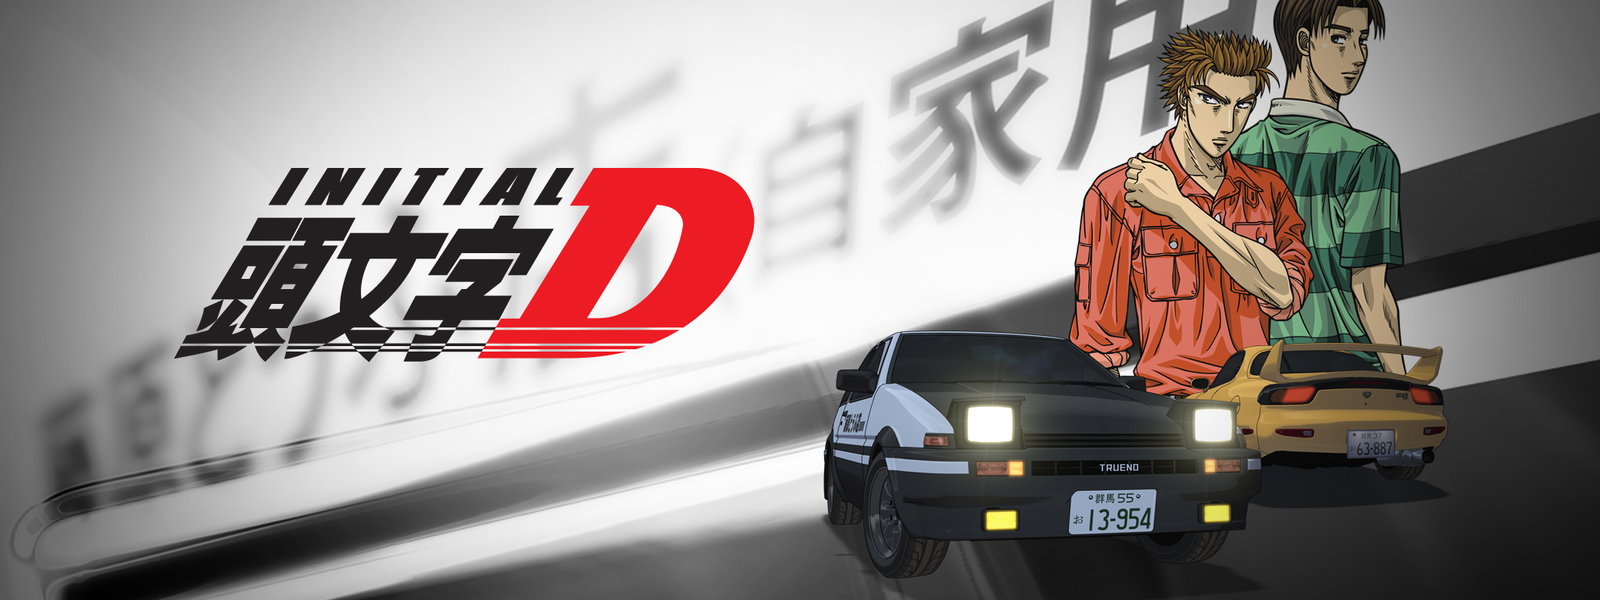 Initial D Complete Series High Quality Dual Audio Mkv 1080p Blu Ray Rip Nyaa Iss